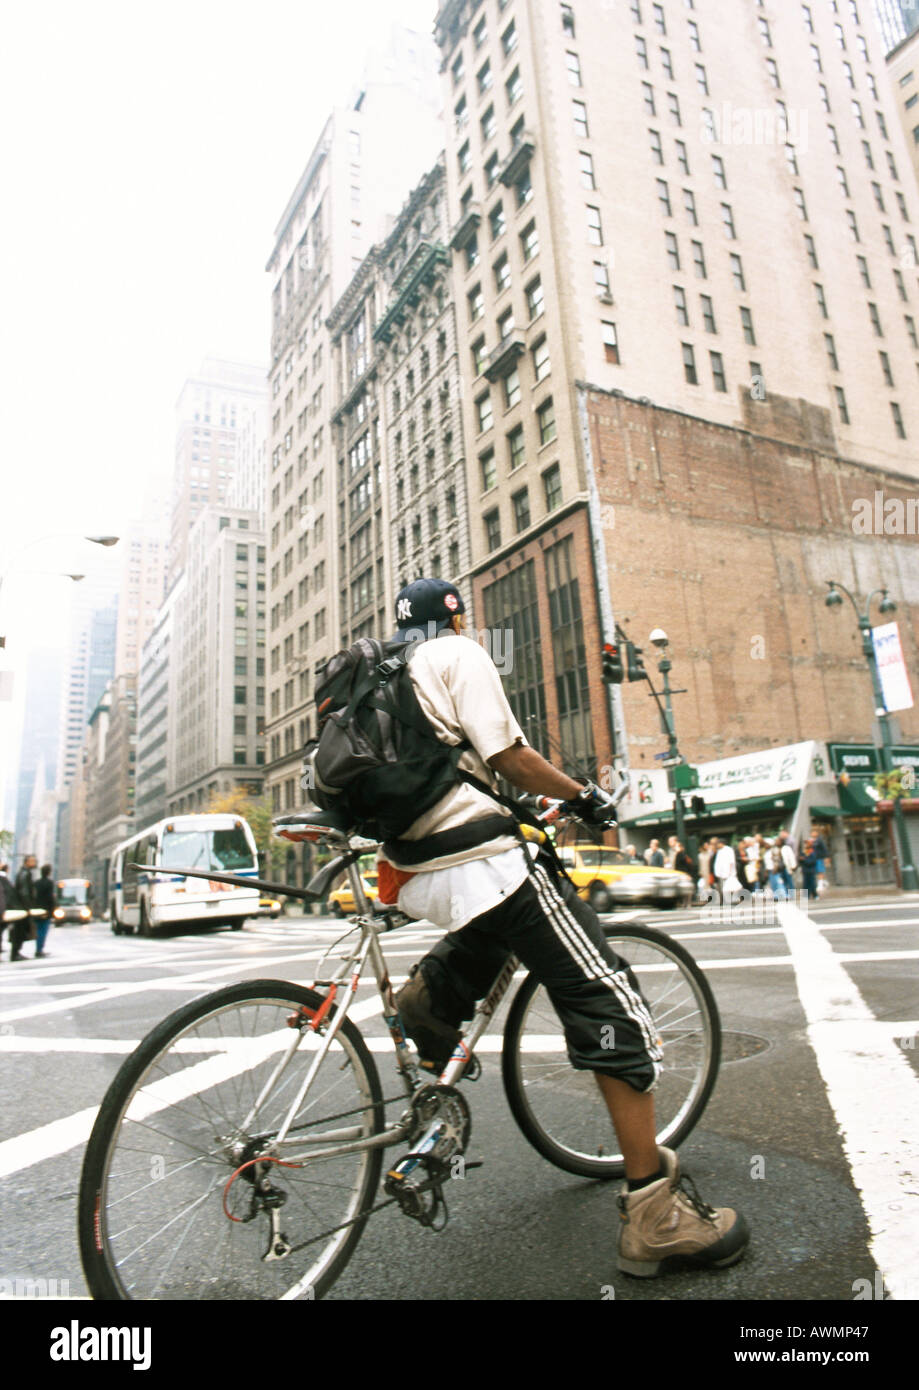 Man riding bike in street, buildings in background Stock Photo